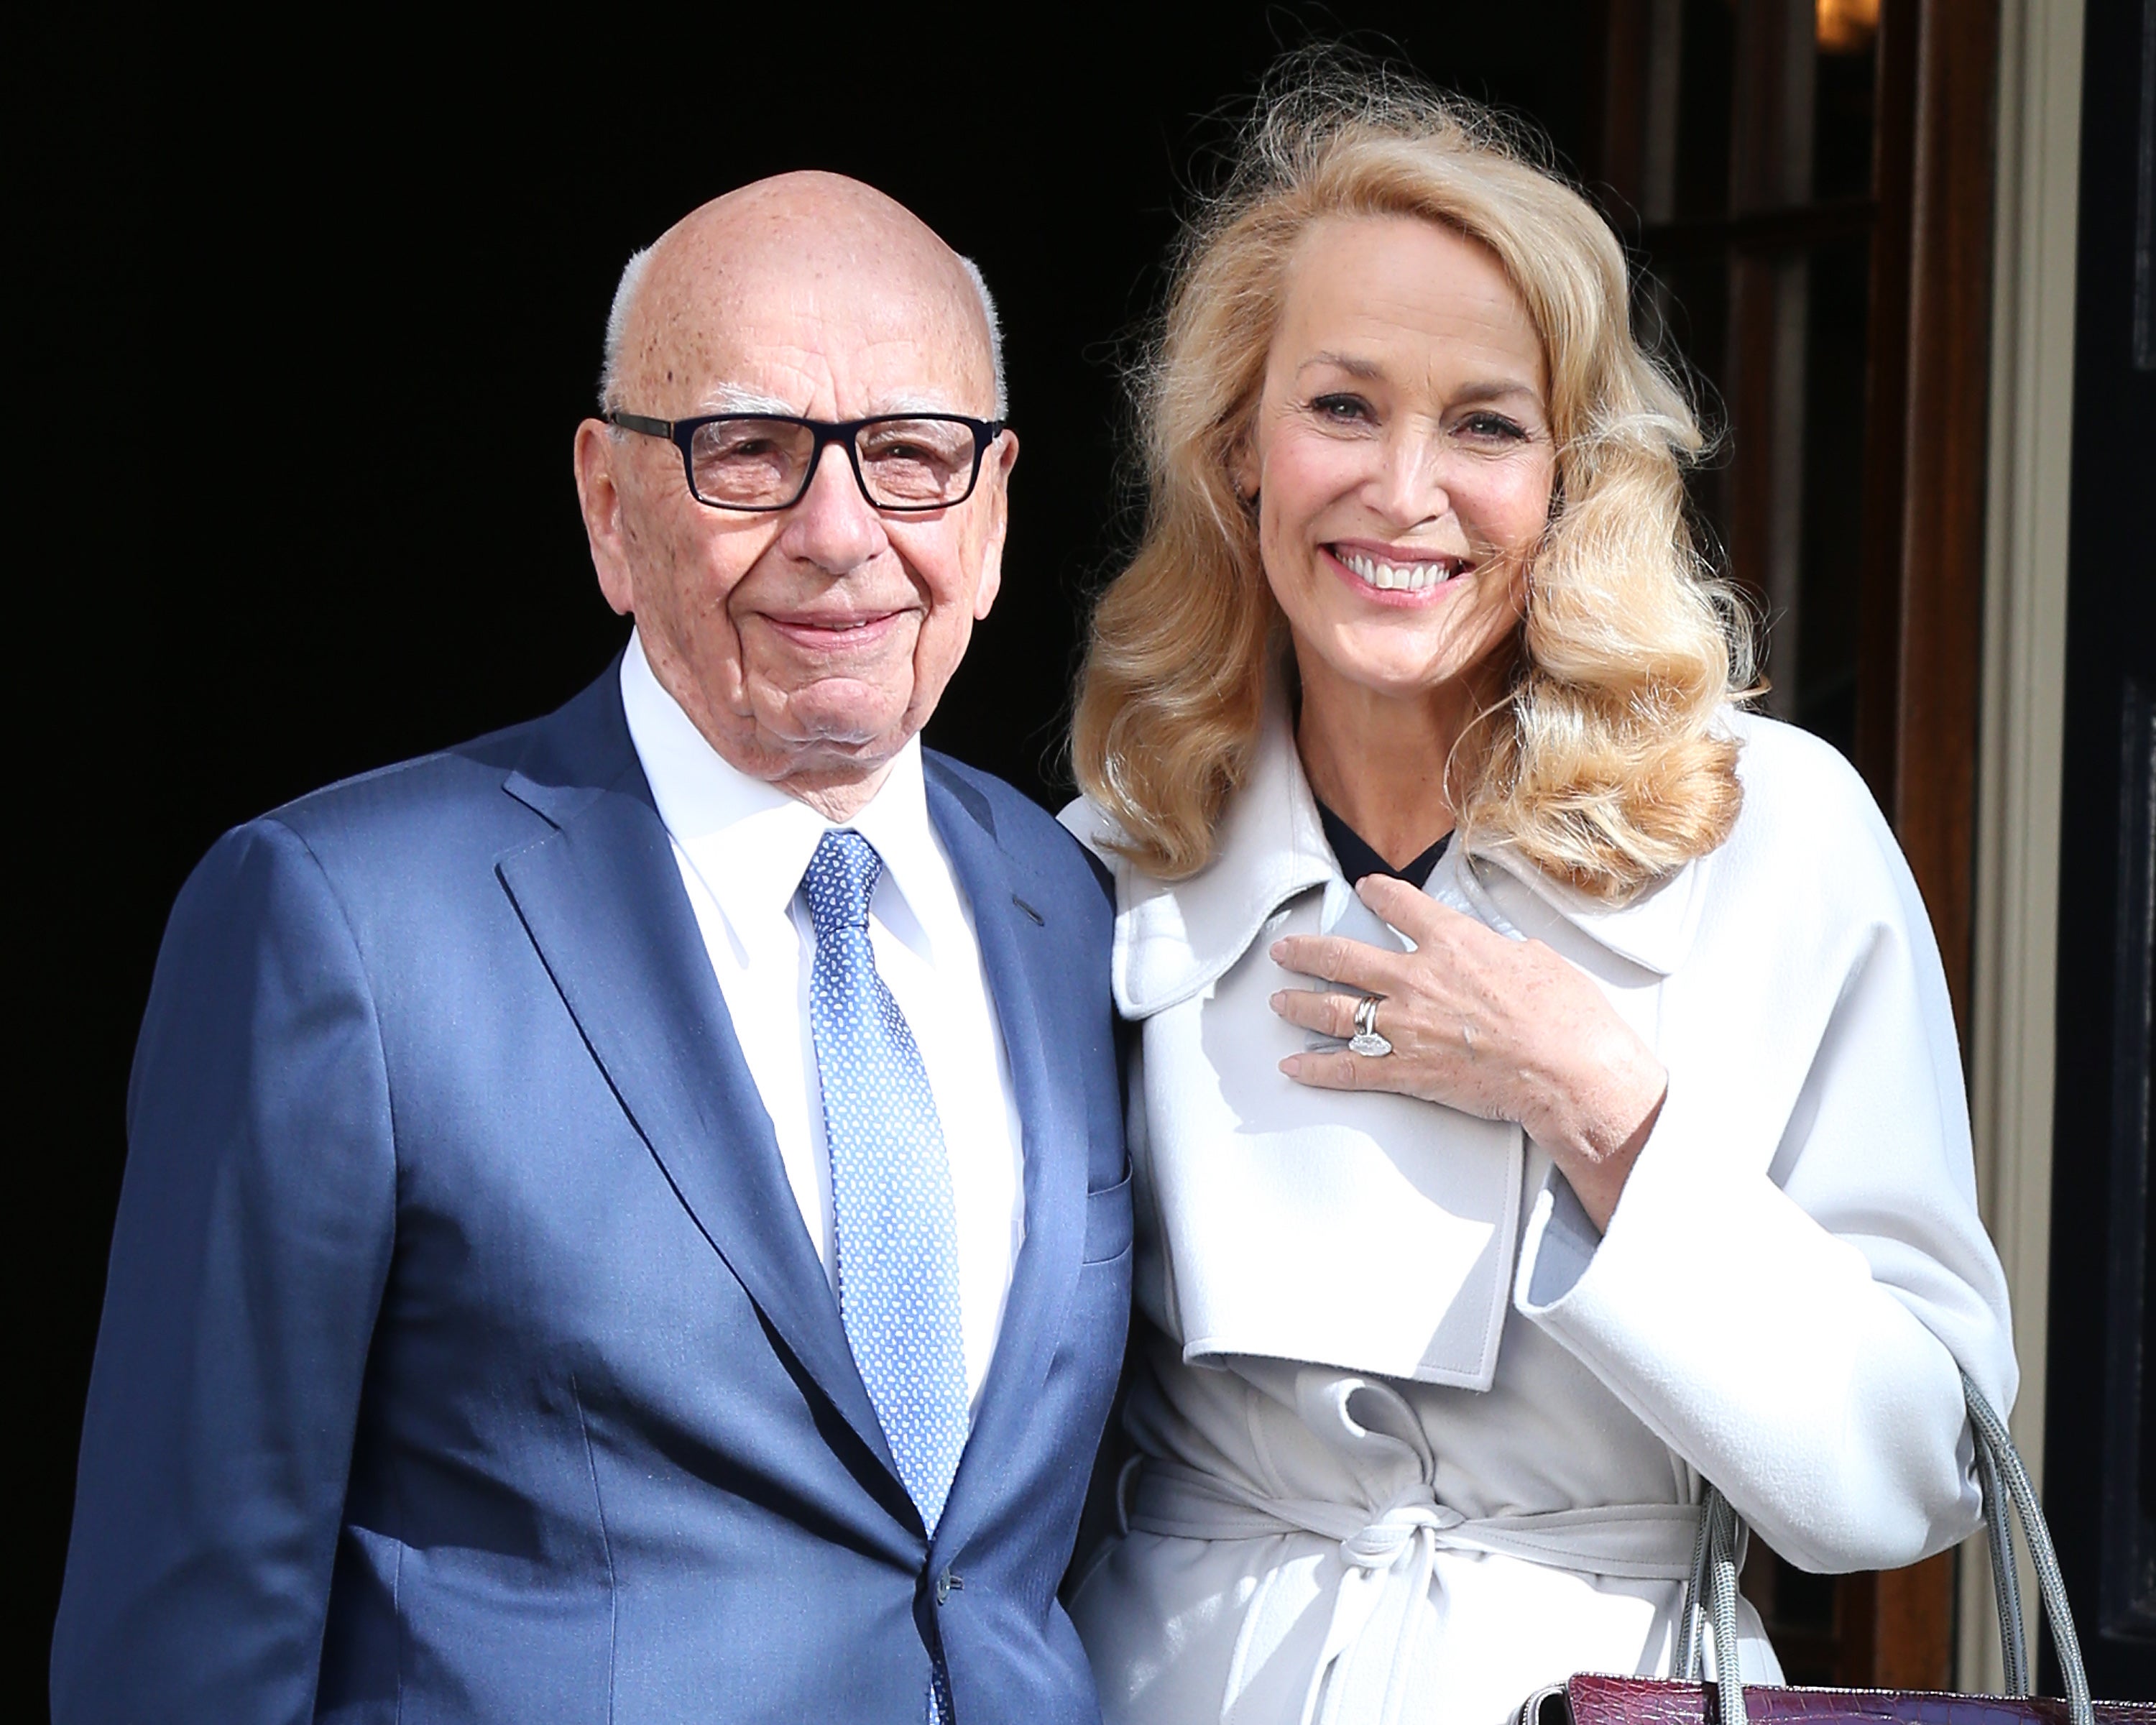 Rupert Murdoch and Jerry Hall after getting married in 2016